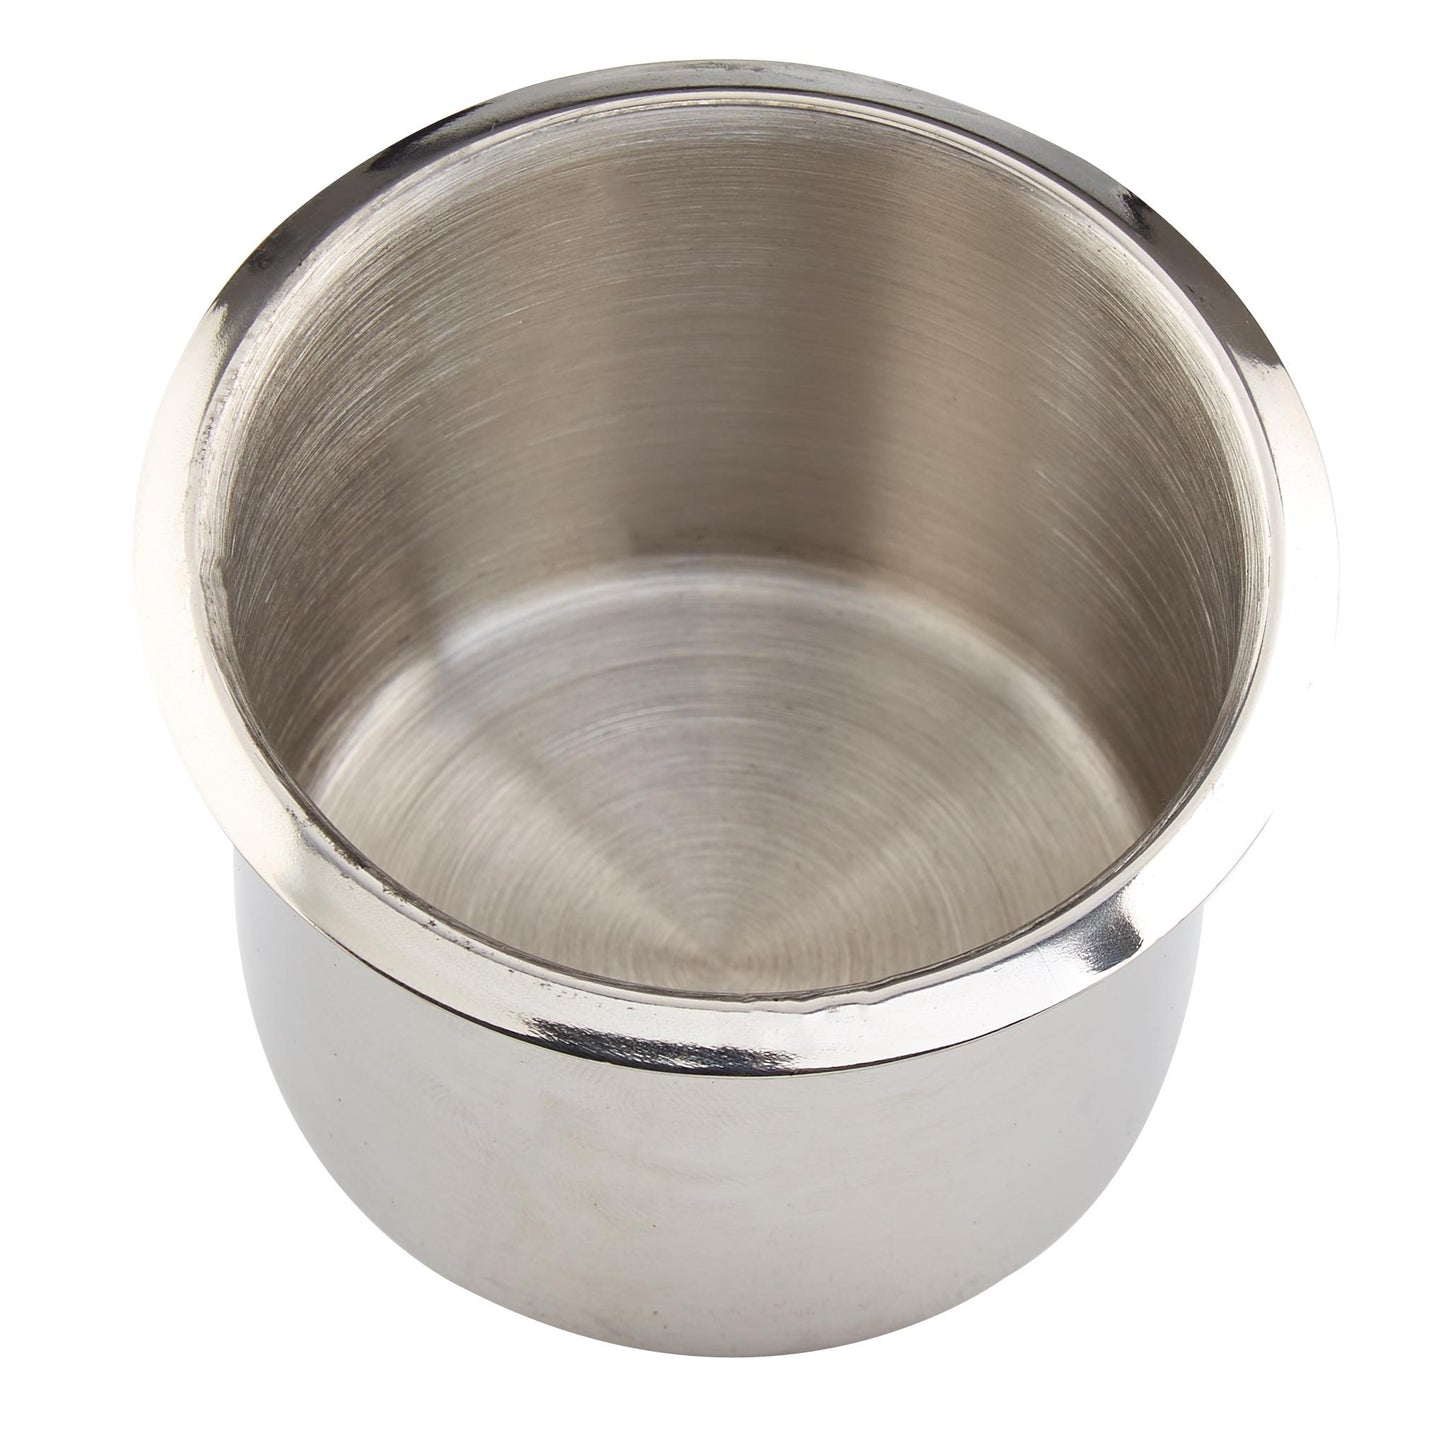 Small Stainless Steel Cup Holder